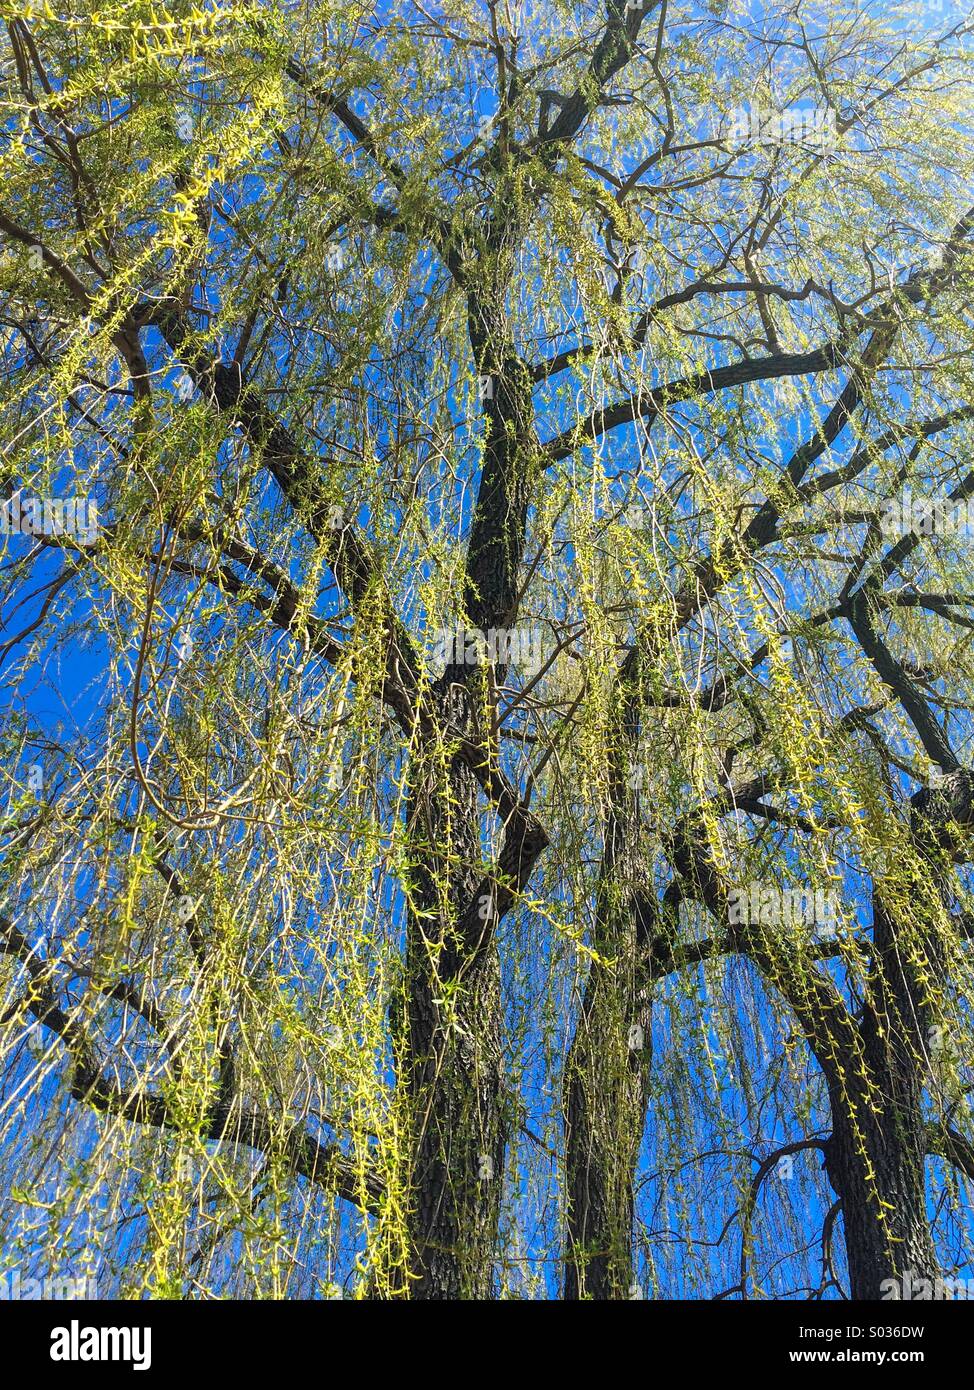 Weeping willow tree Stock Photo